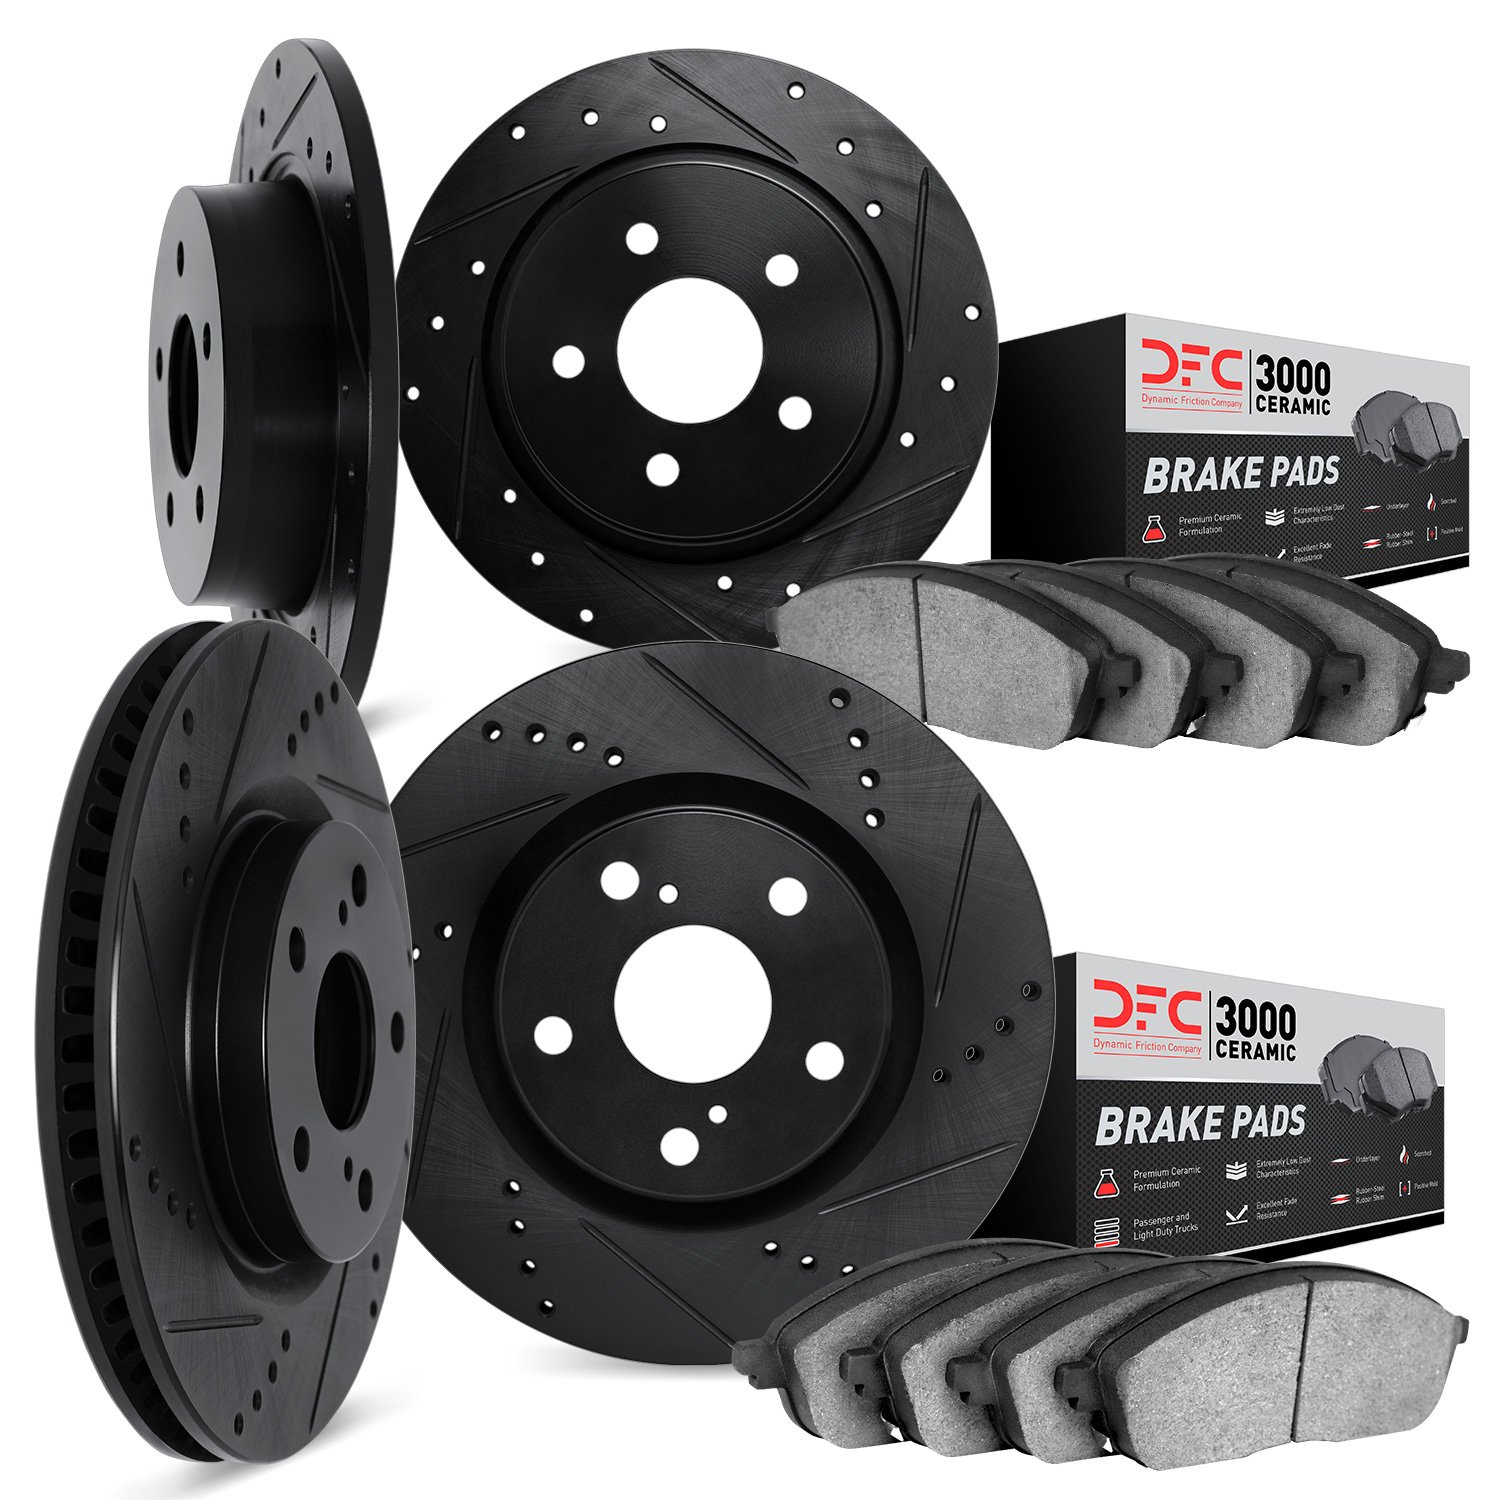 8304-13013 Drilled/Slotted Brake Rotors with 3000-Series Ceramic Brake Pads Kit [Black], 2002-2003 Subaru, Position: Front and R